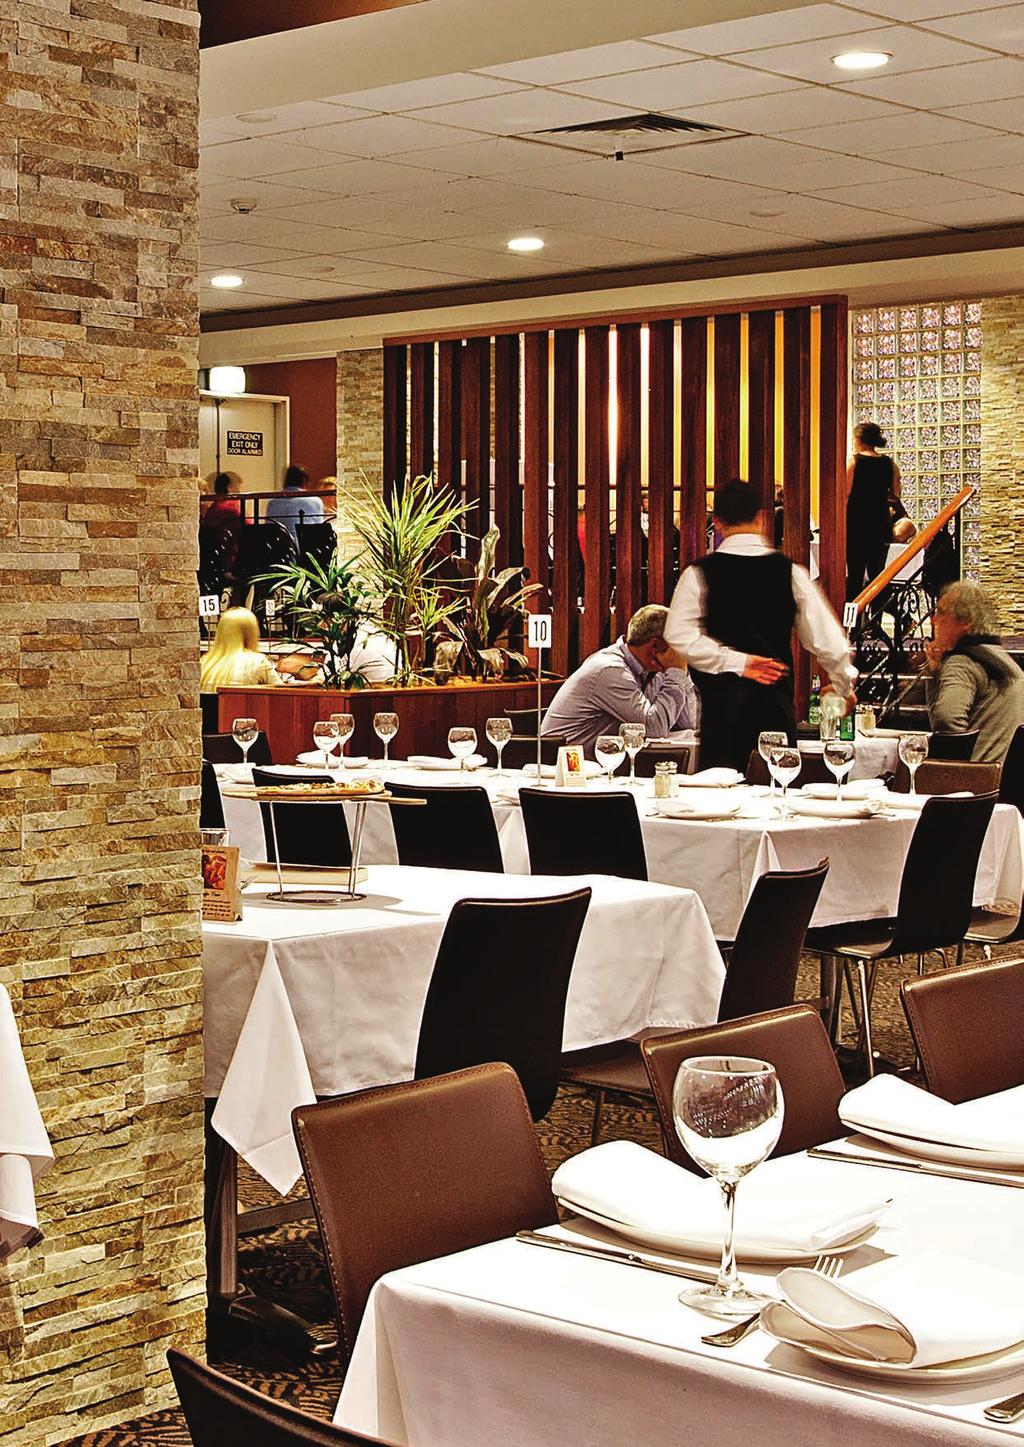 Lilys Restaurant & Function Centre Lilys Restaurant, Bar & Function Centre is a fabulous Italian themed function venue with 5 modern